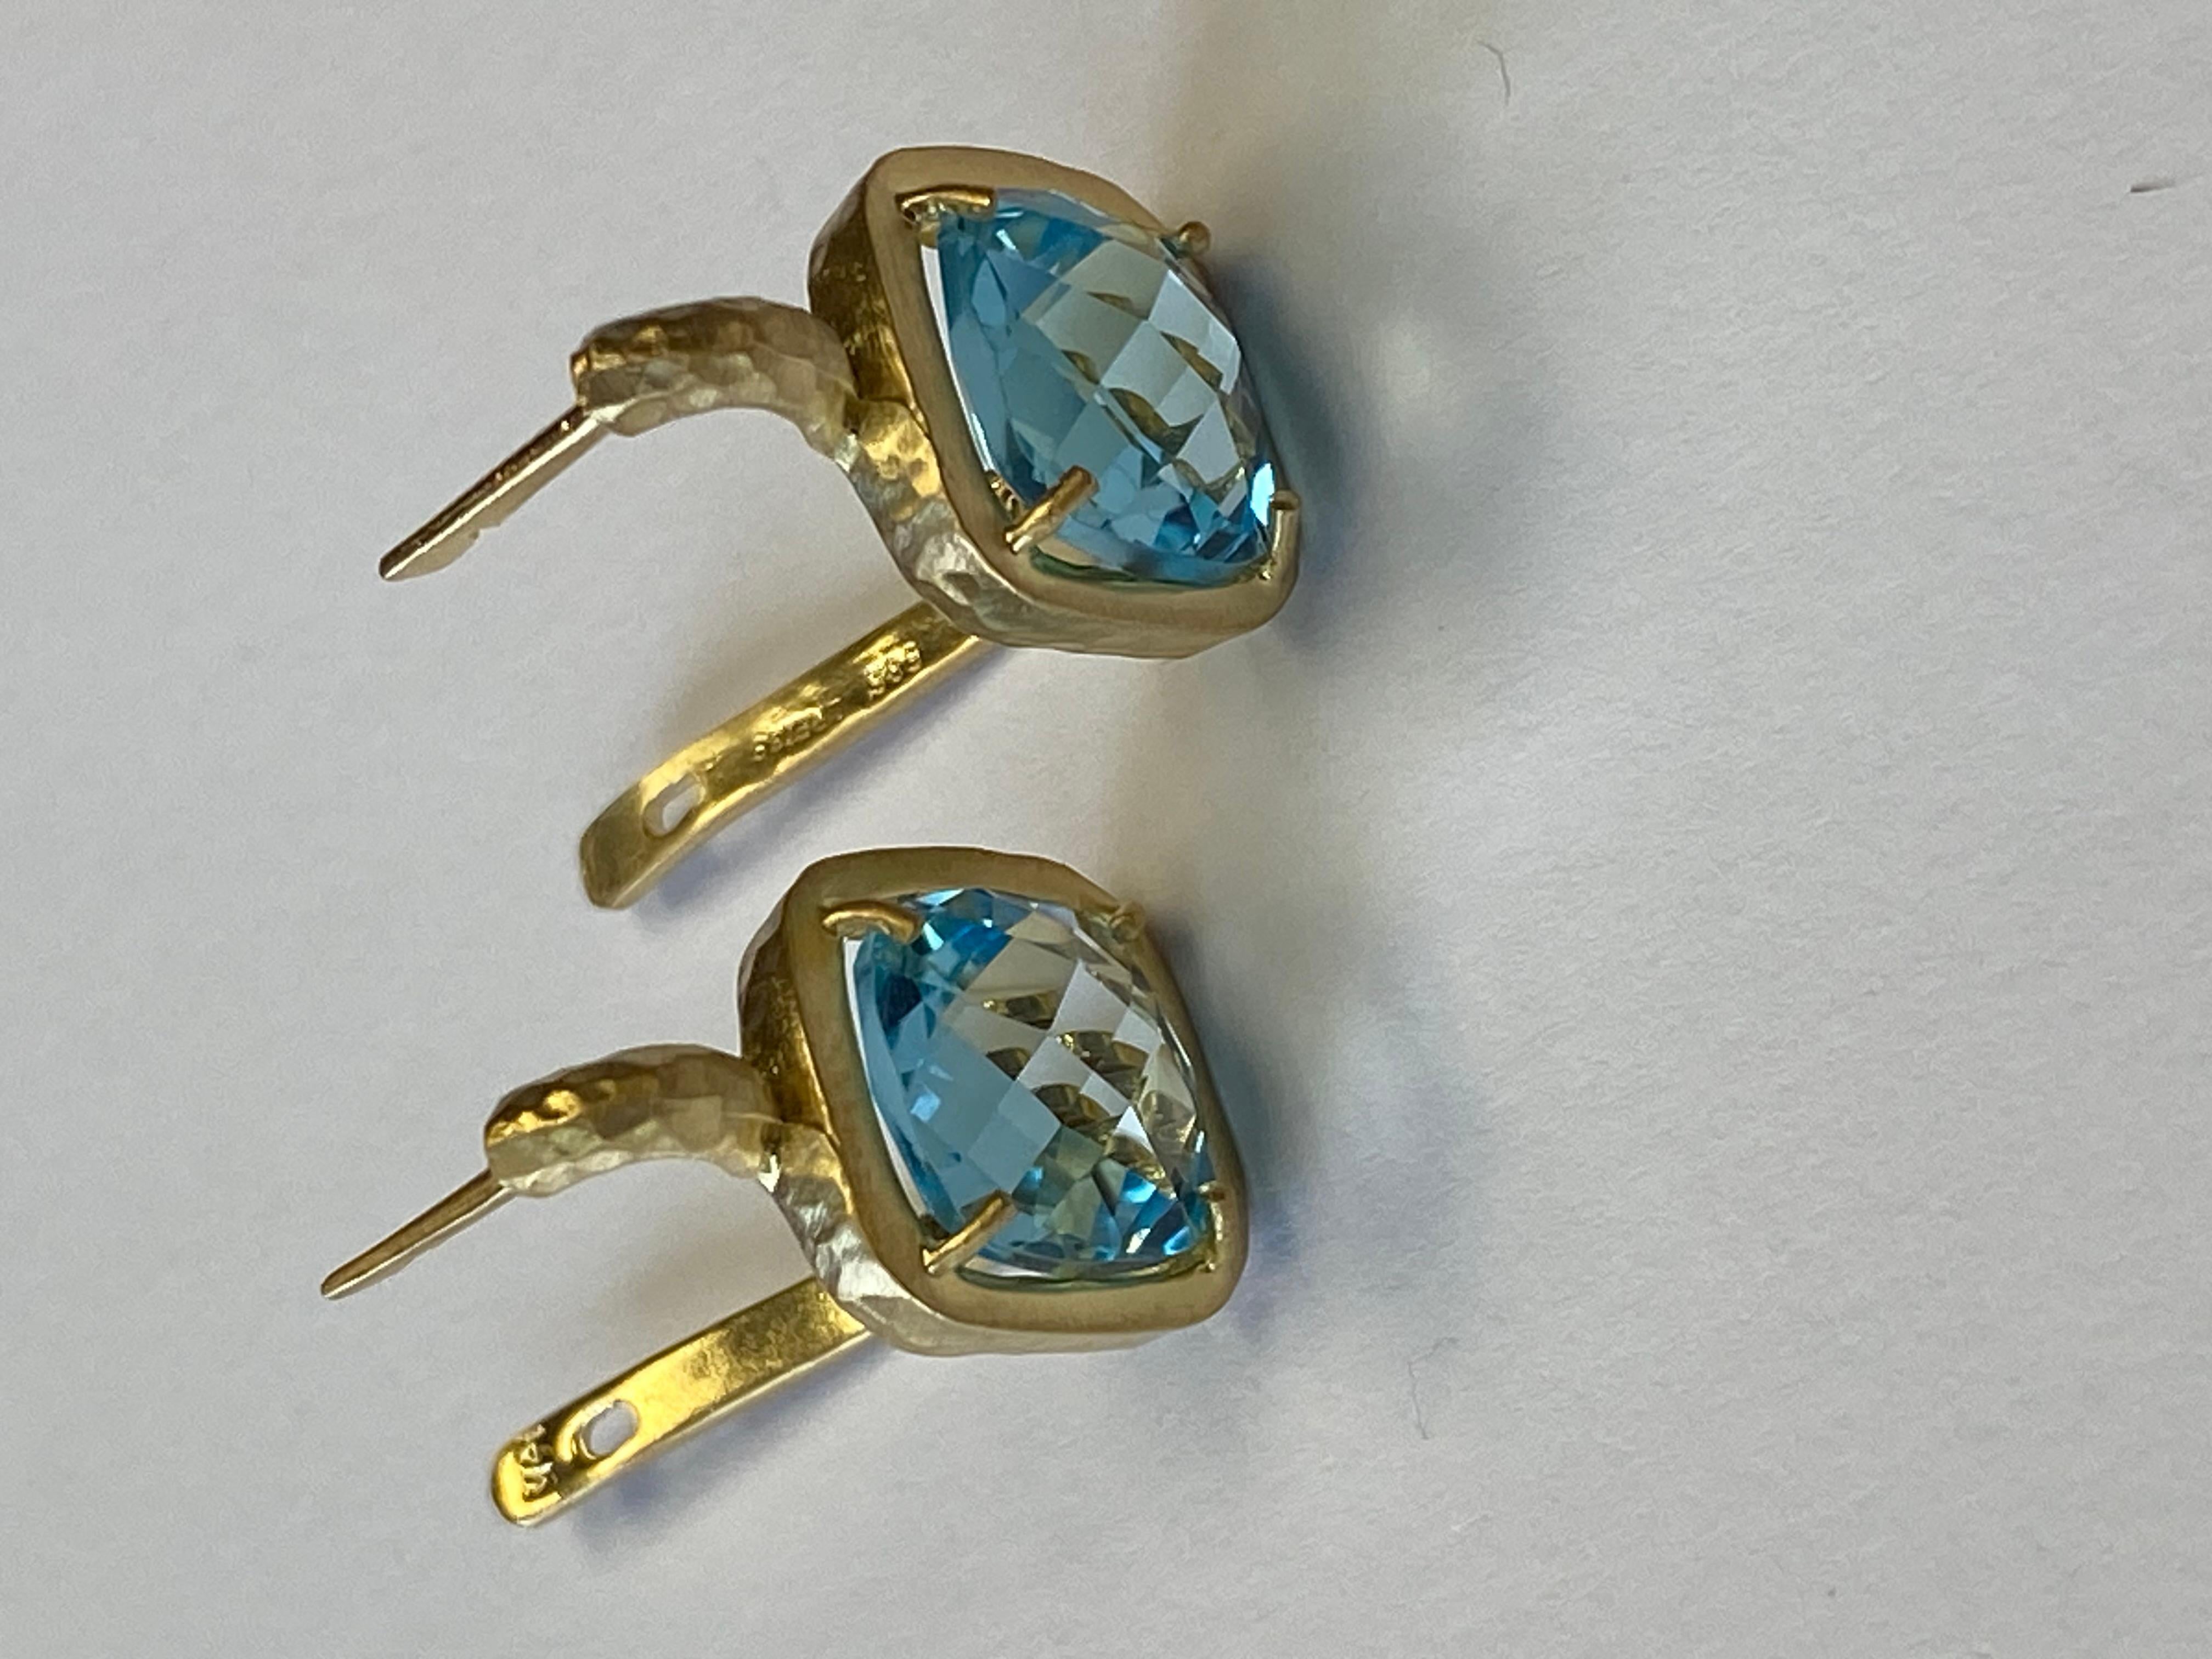 14 Karat Yellow Gold Matte and Hammer-Finished Drop Earrings, Centered with a 10mm 9.5CT Checkerboard Cushion-Cut Blue Topaz Semi-Precious Color Stone
